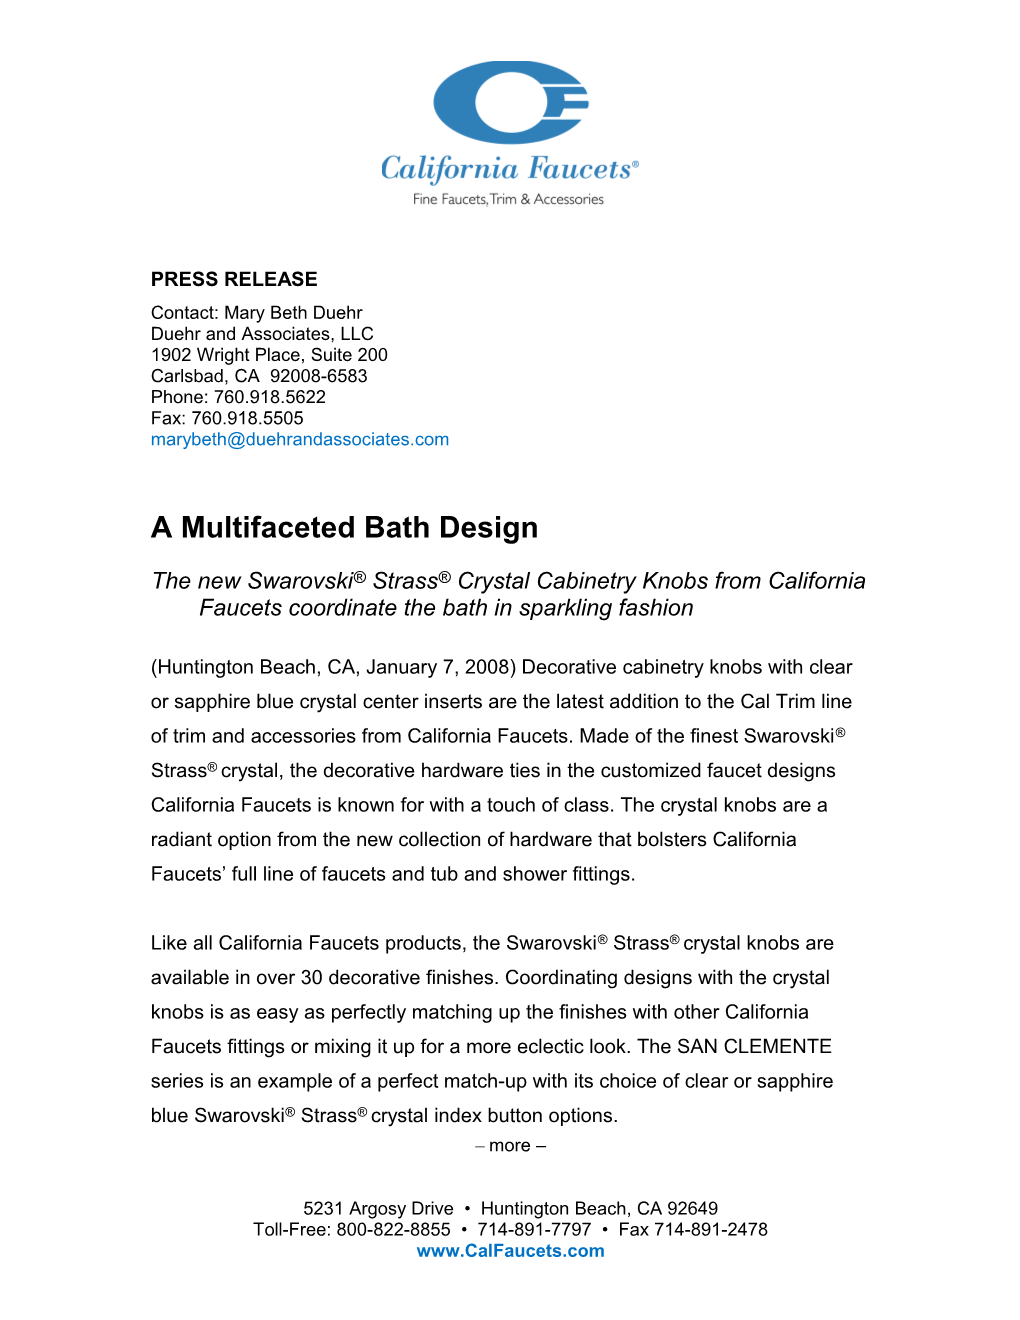 This Release Is Part News Announcement in That California Faucets Is Going Into a Brand